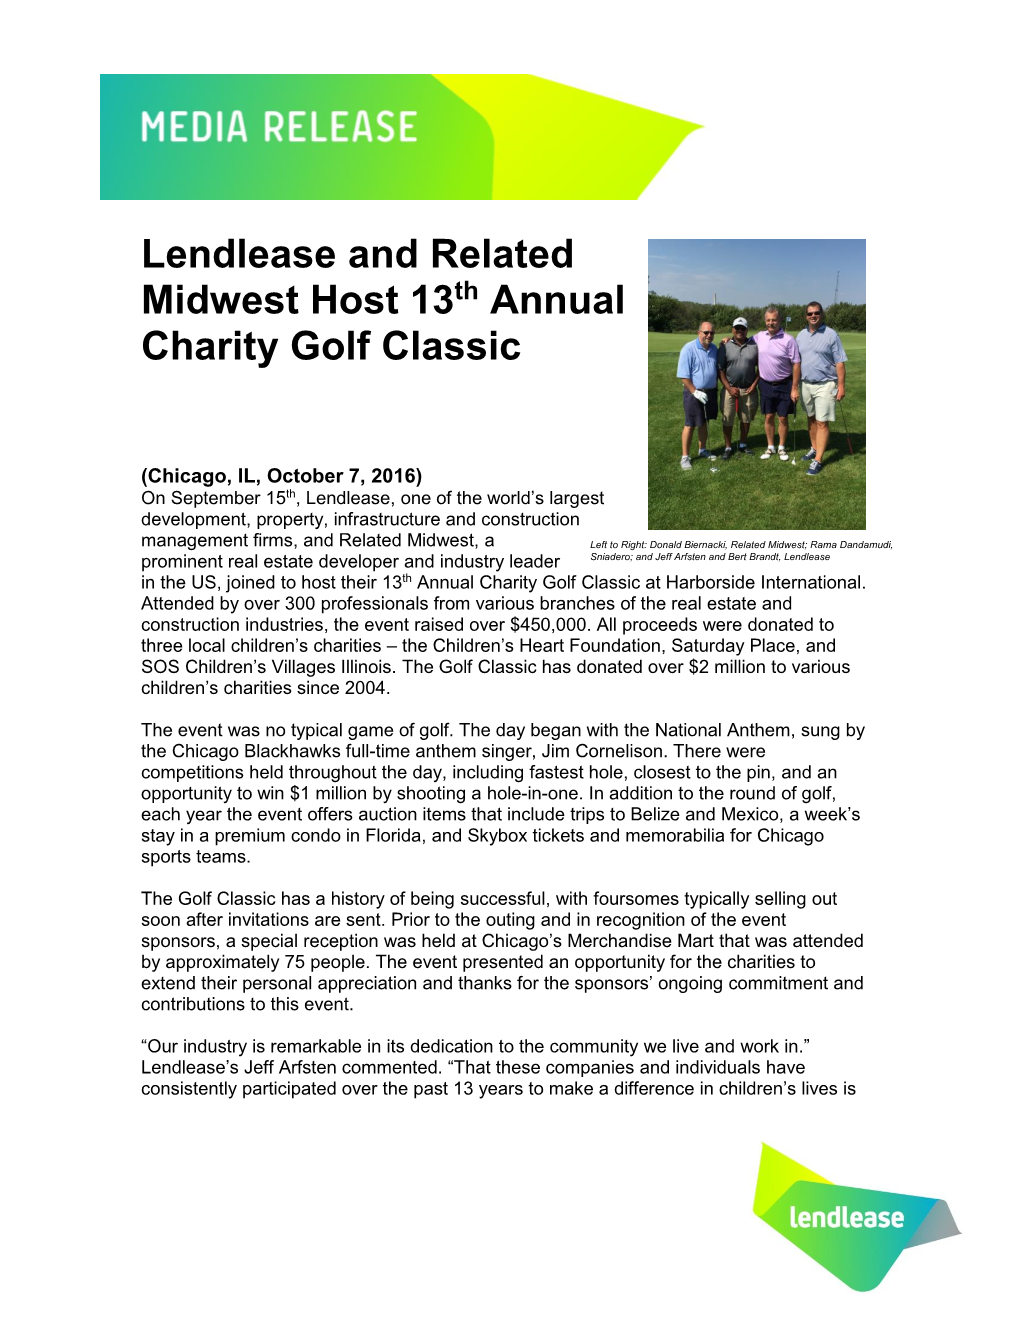 Lendlease and Related Midwest Host 13Th Annual Charity Golf Classic